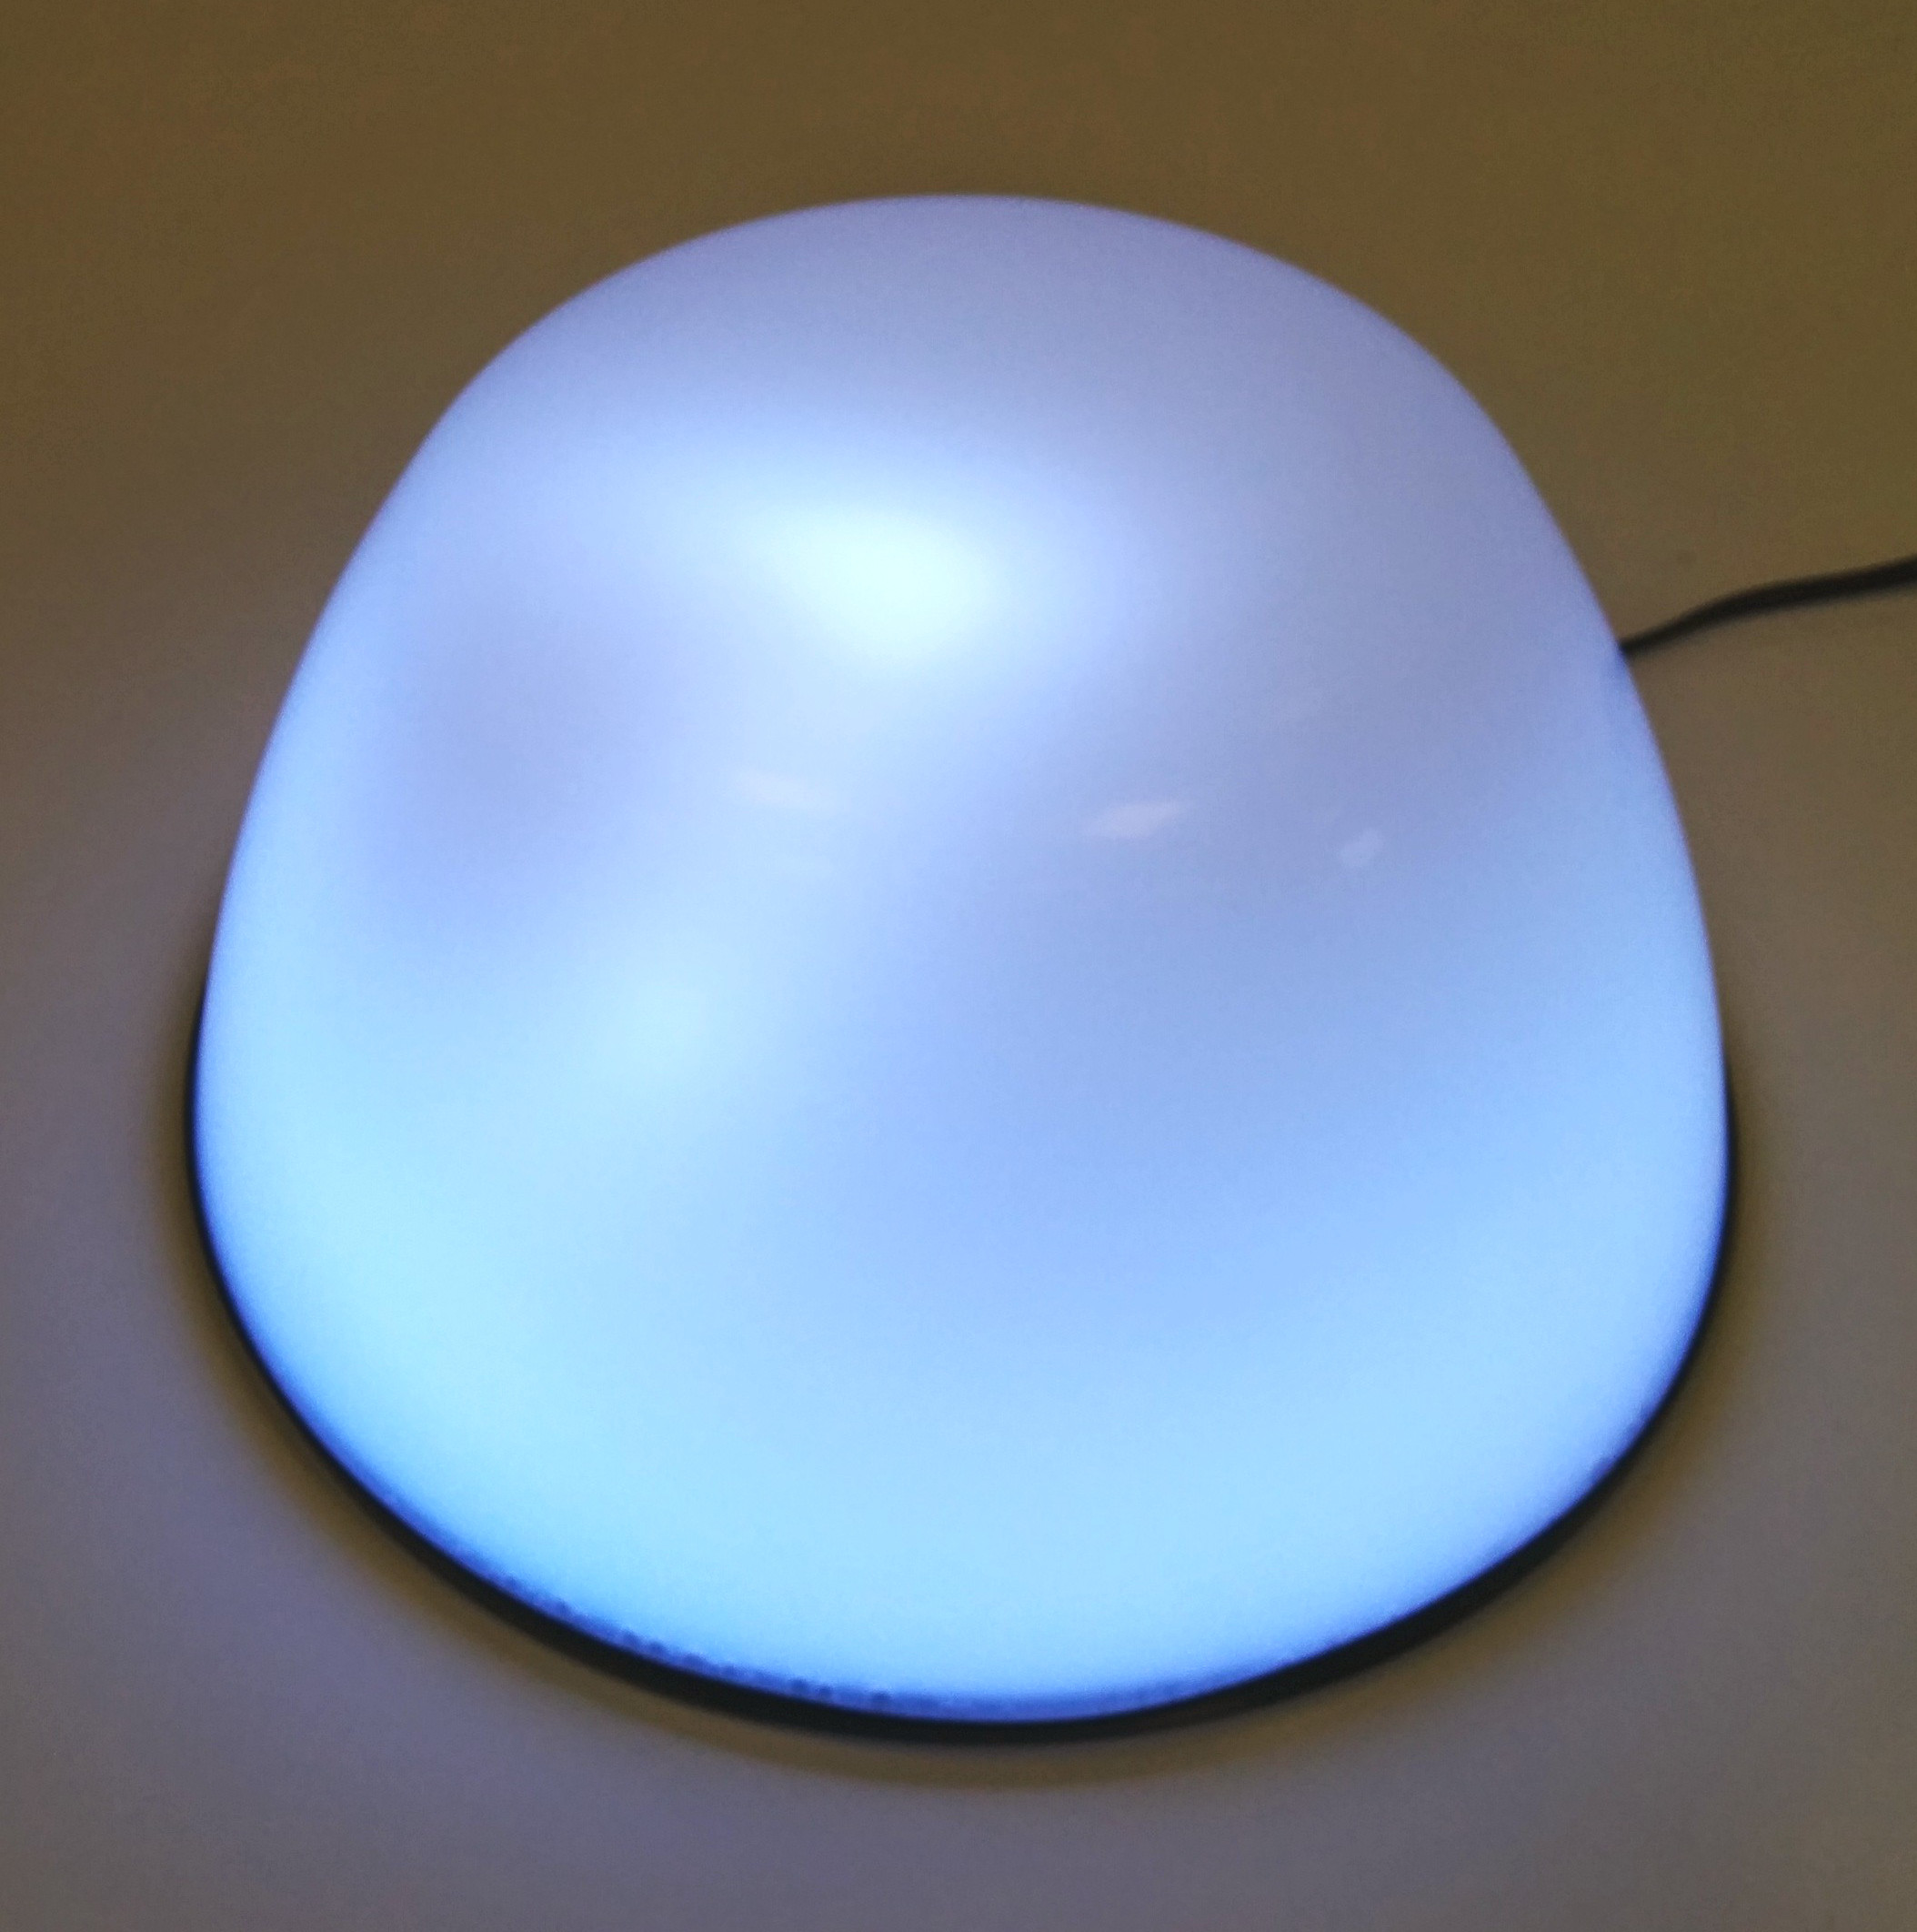 Opalescent PU Potting Resin for LEDs Gives Diffused Light Effect 